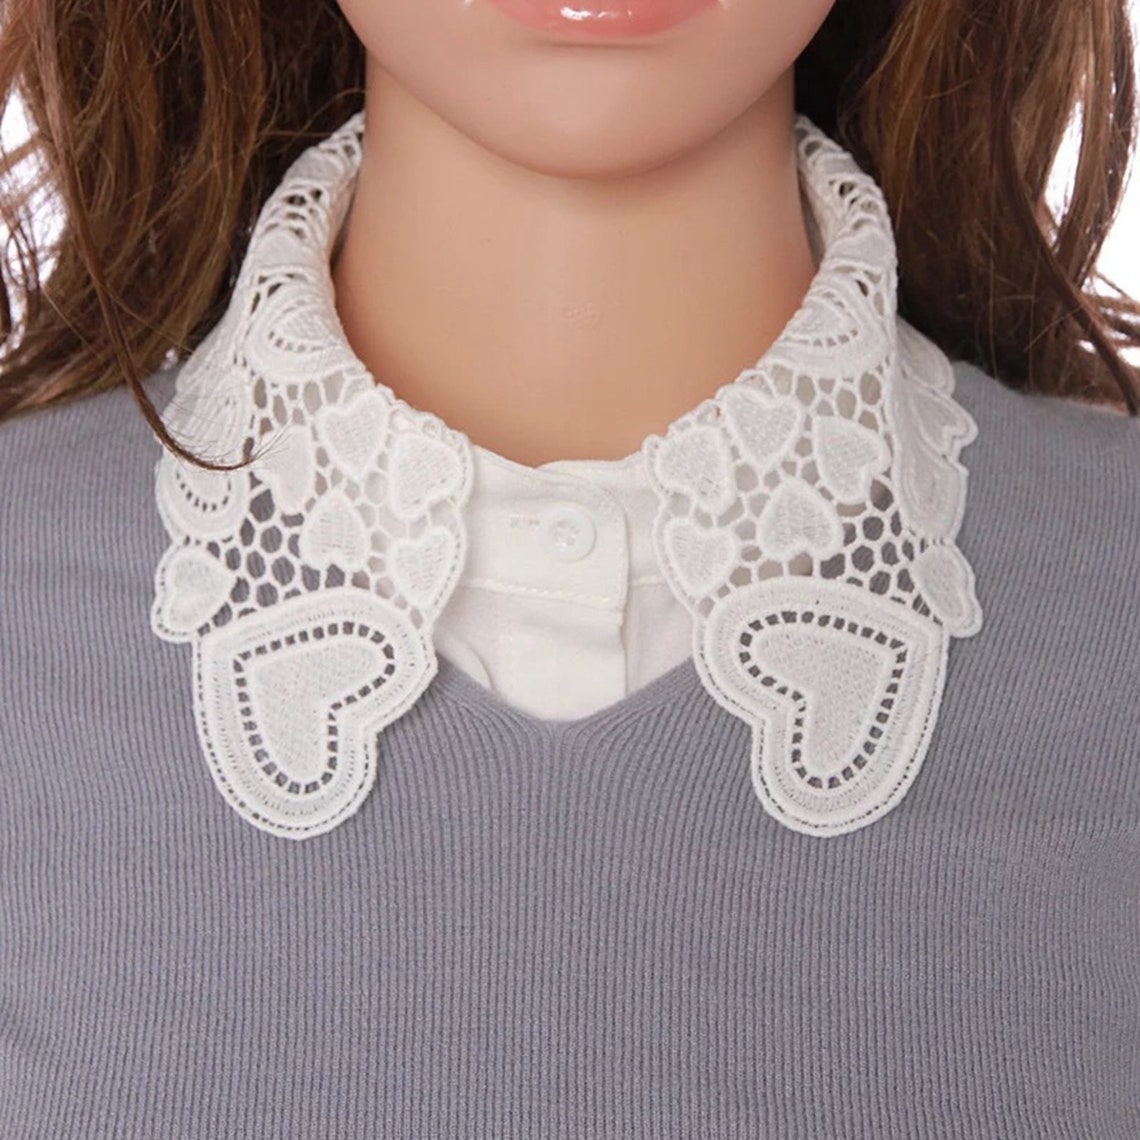 Sweet Heart Lace Collars Daily clothes fake collar Sew on | Etsy